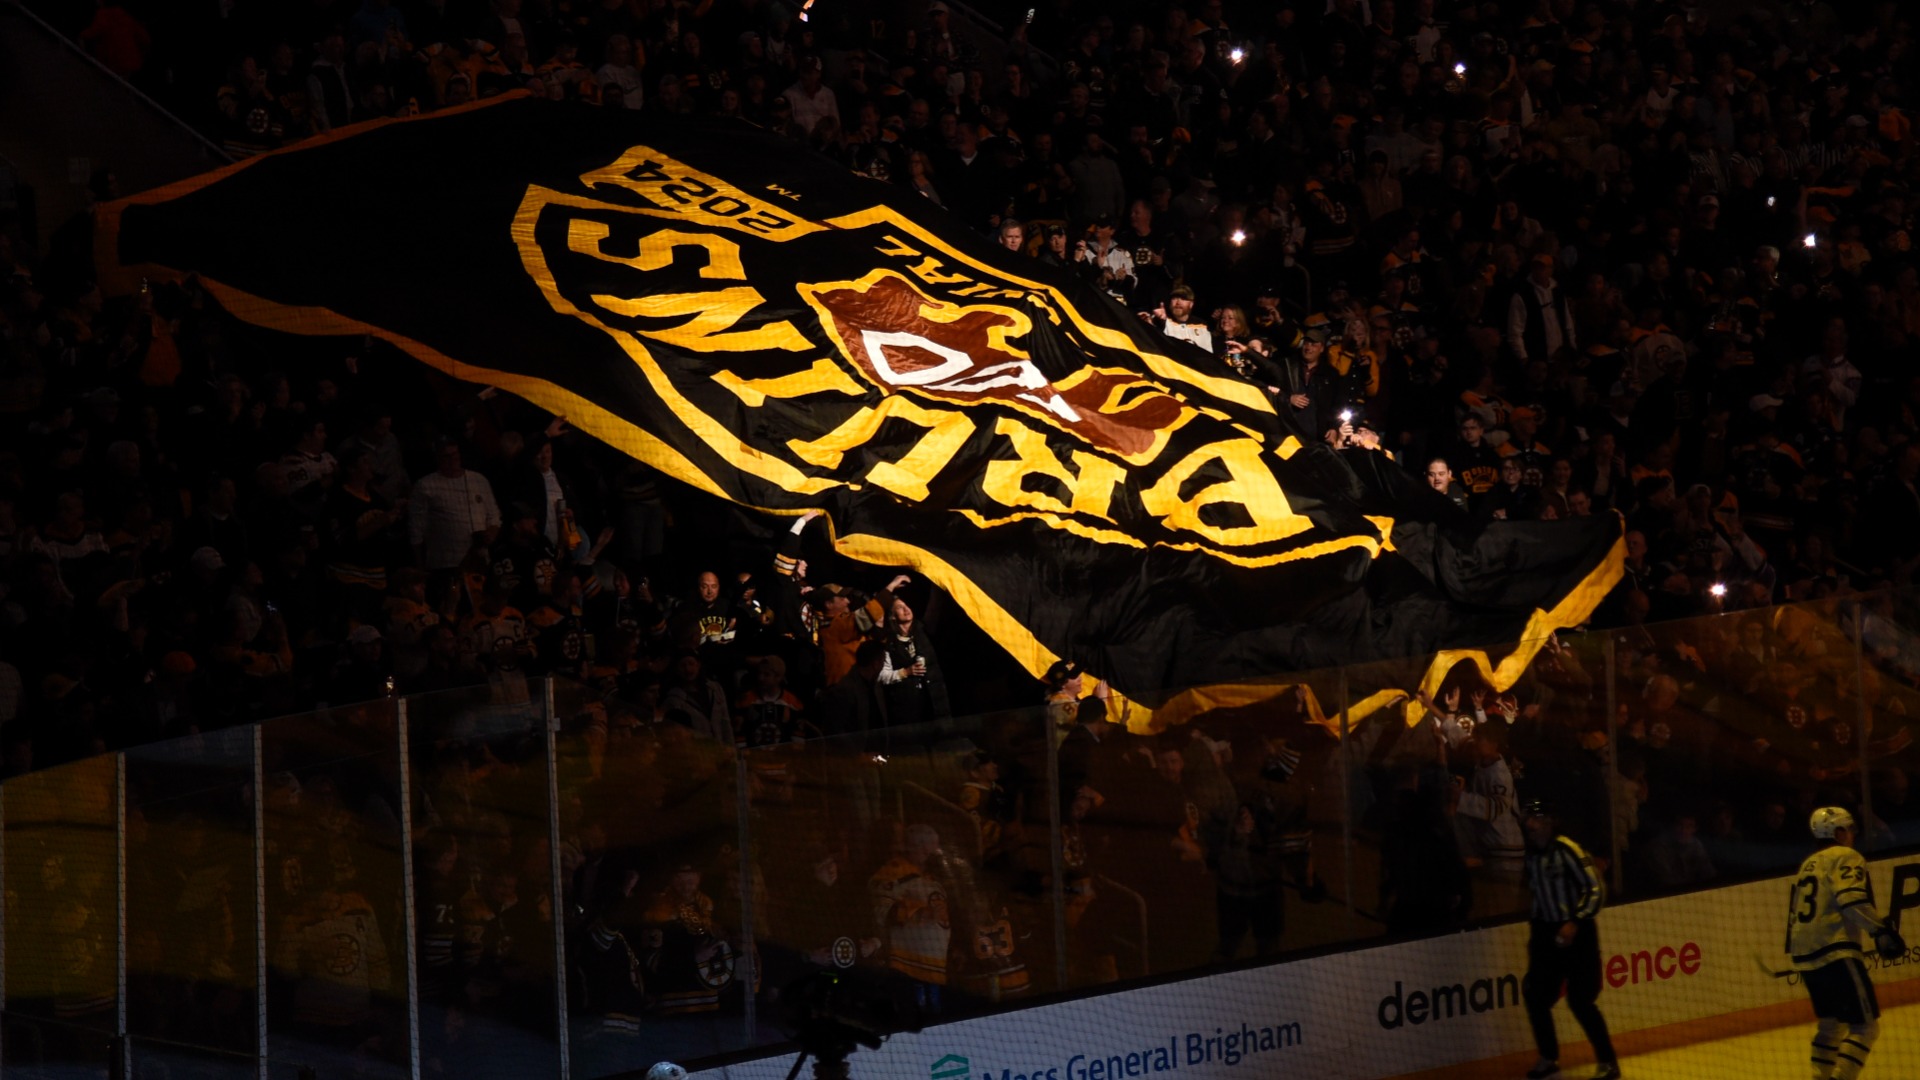 Bruins Post Hype Video Before Do-Or-Die Game 5 Vs. Panthers